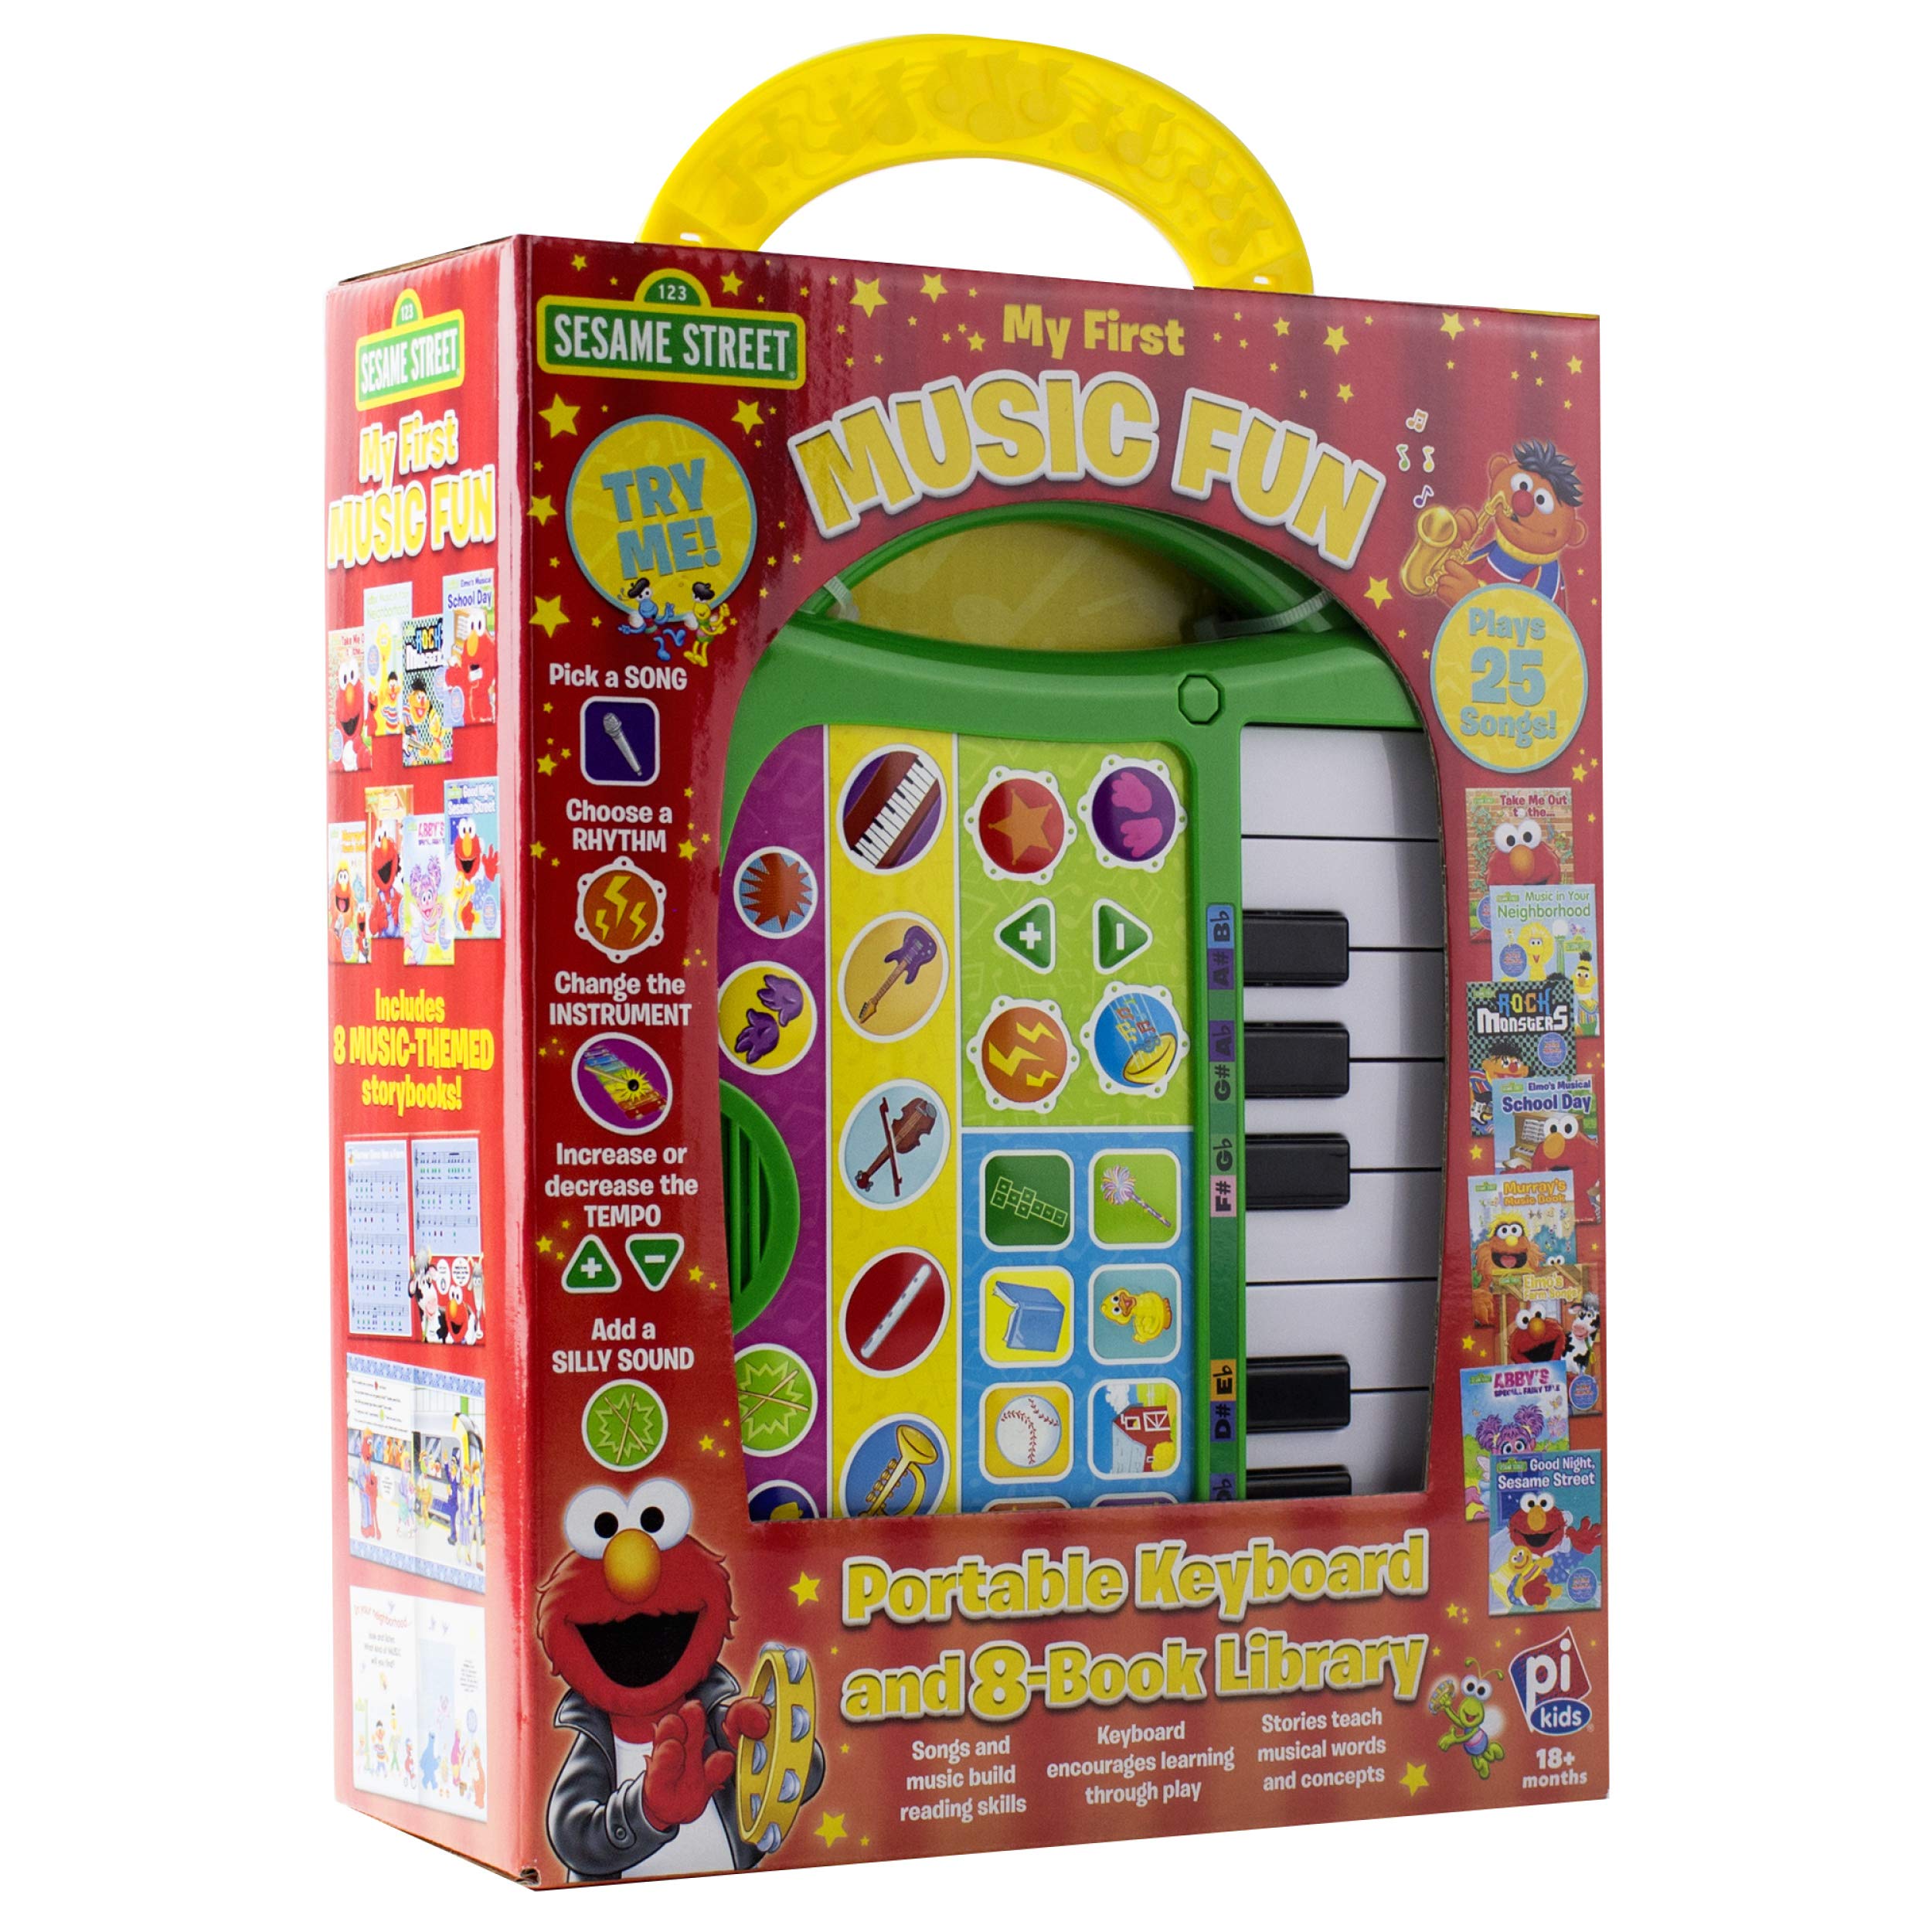 Sesame Street - My First Music Fun - Portable Keyboard and 8-Book Library - PI Kids